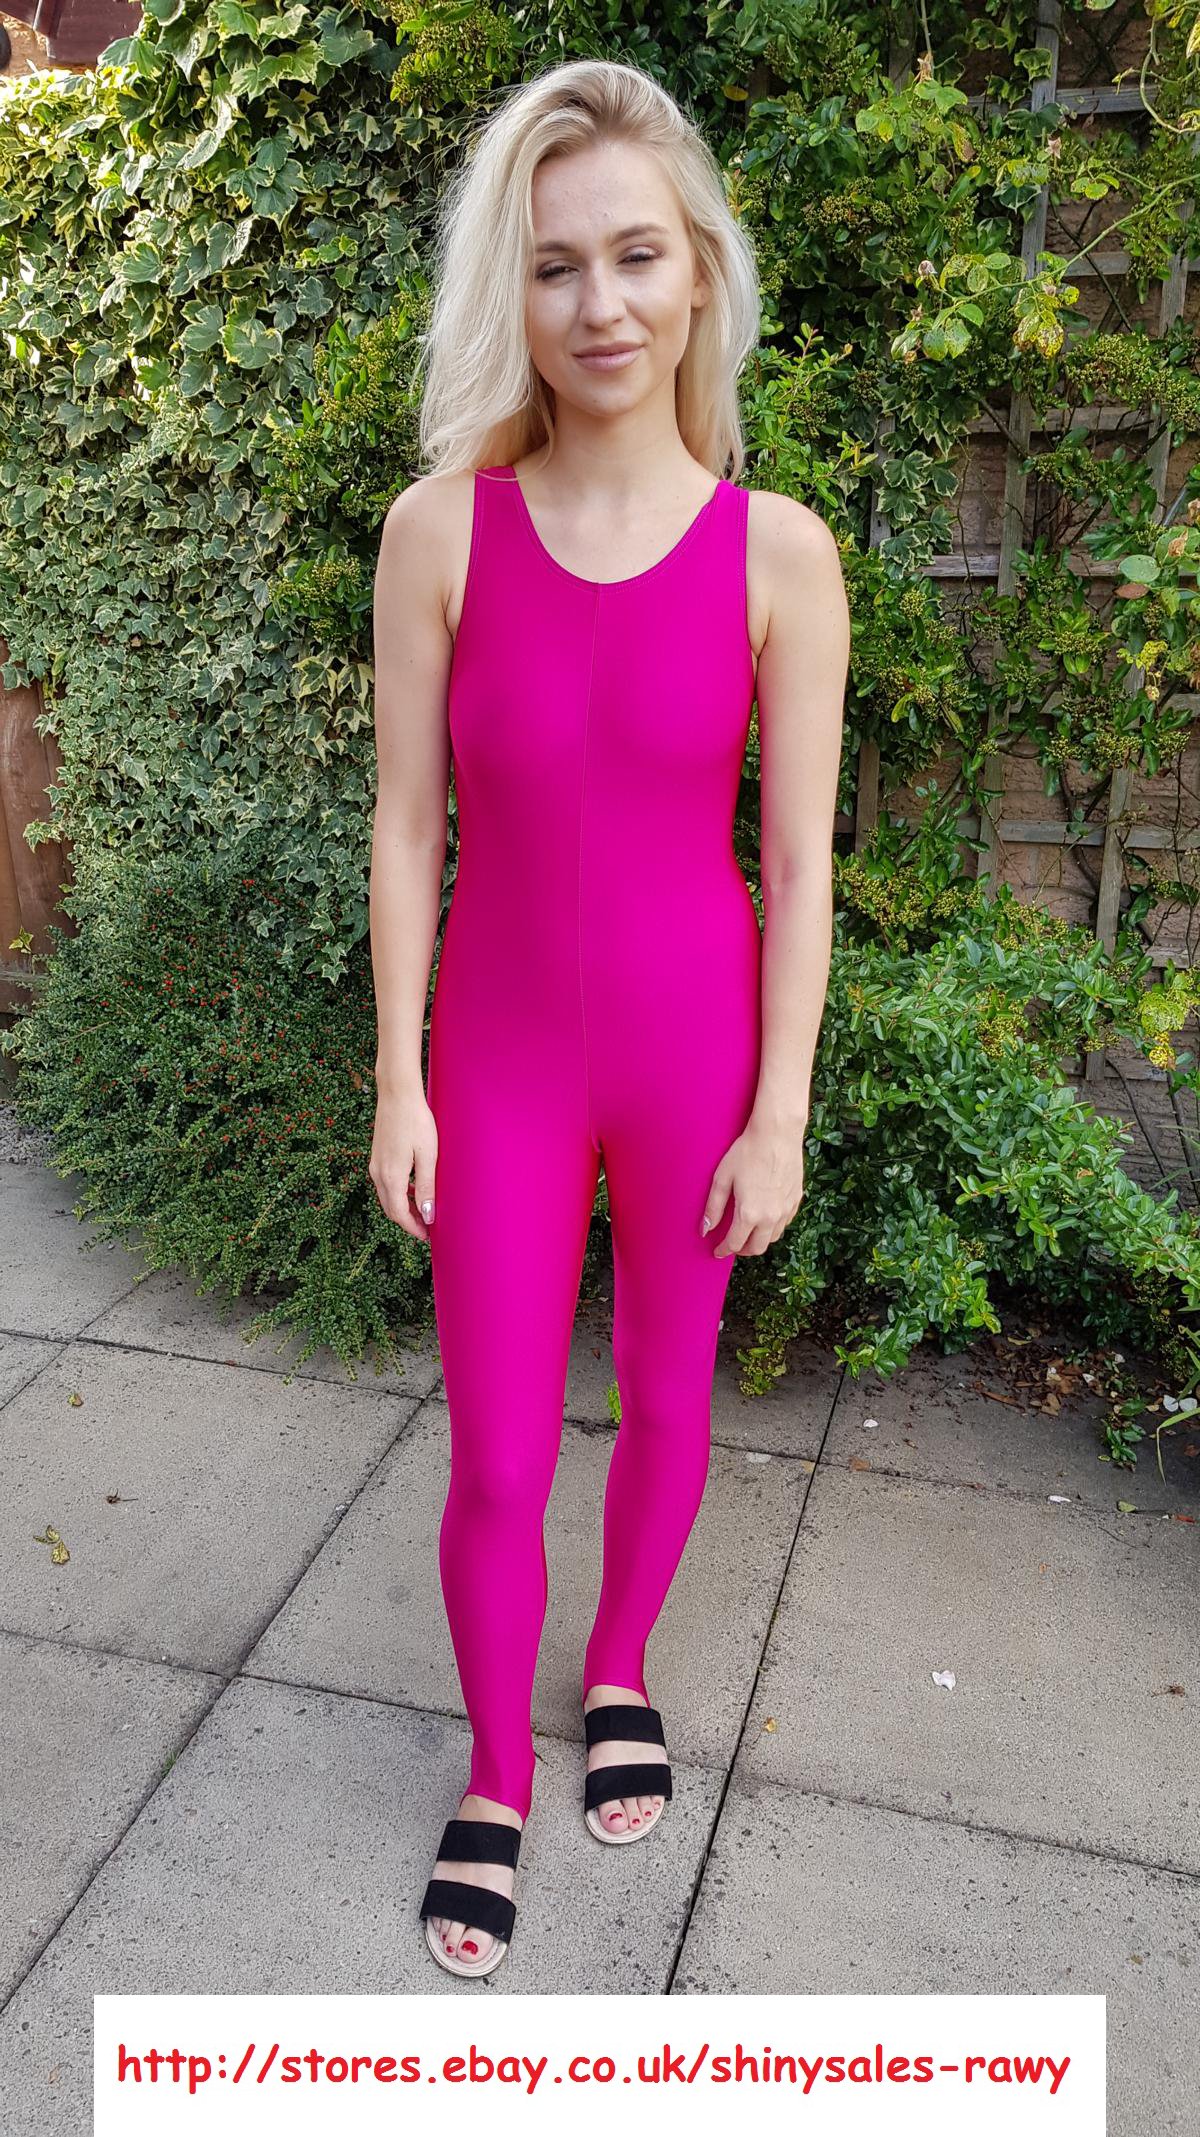 ShinySalesRawy on X: Don't miss our latest video featuring Jodie showing  off a cute Pink Spandex Catsuit! - Download now at  # lycra  / X